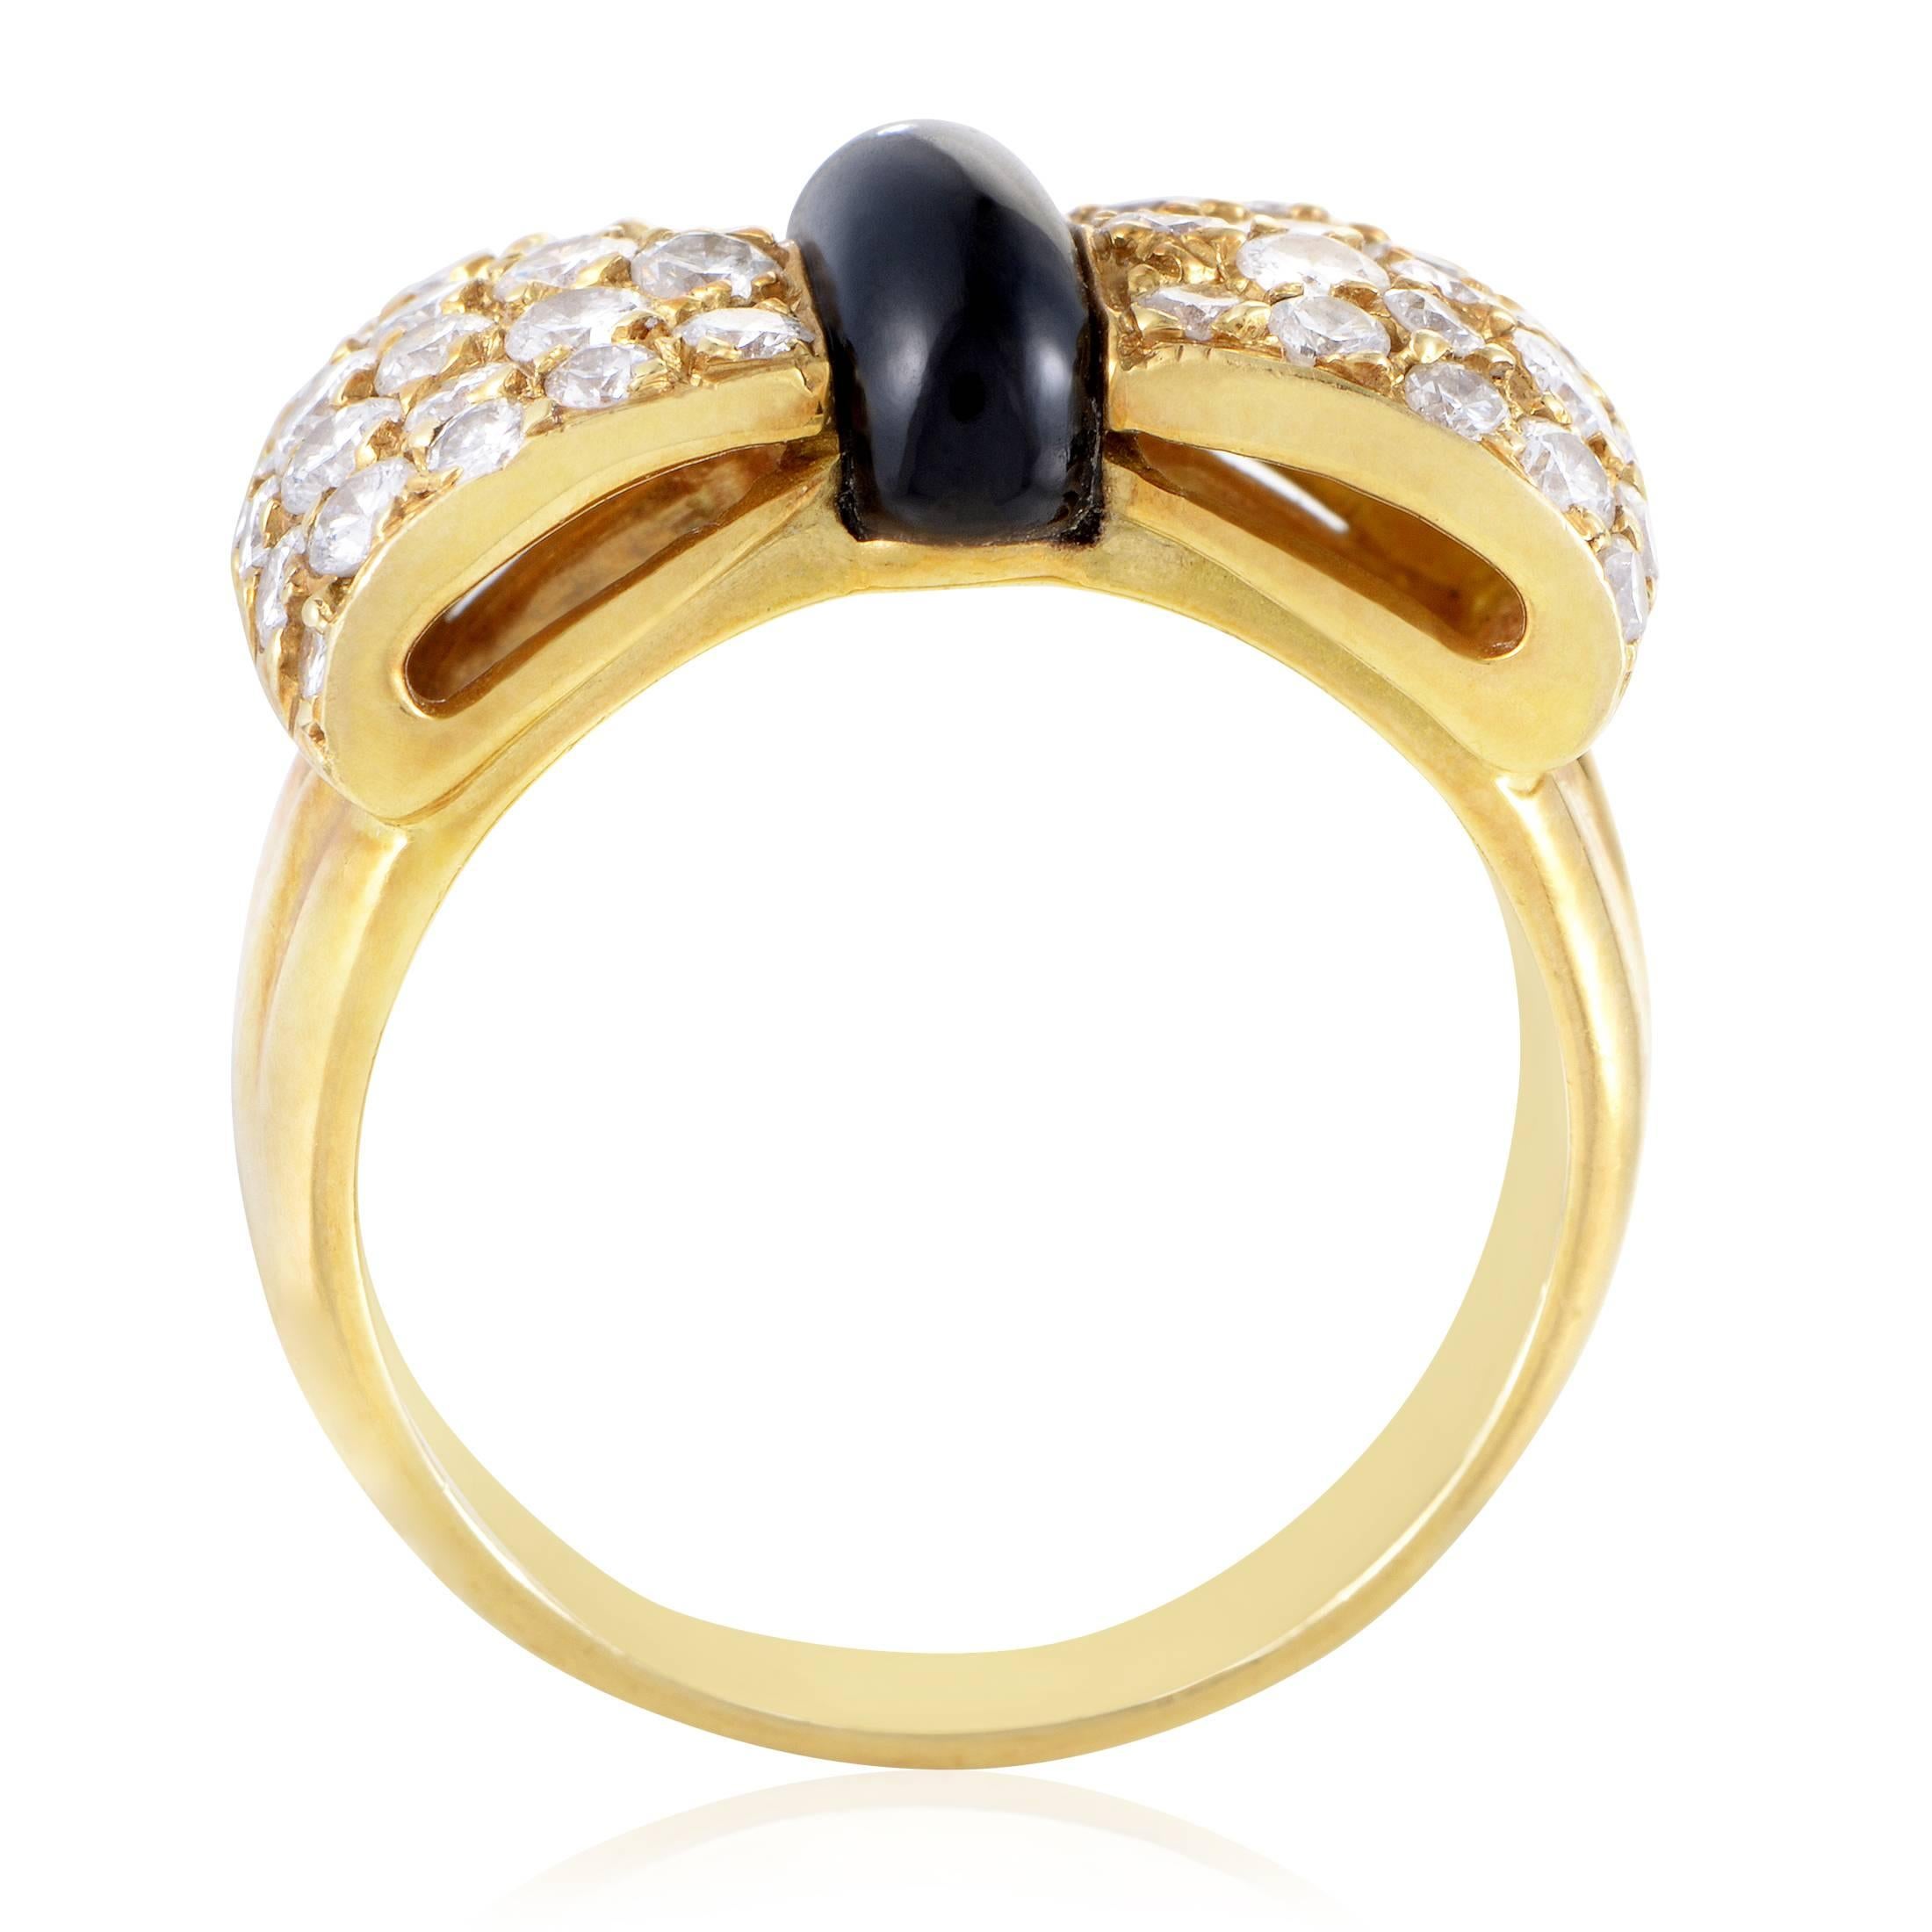 The adorable motif of a bow is presented in a wonderfully contrasting combination of stunning onyx stone and sparkling F-color diamonds of VVS clarity totaling 0.99ct in this exceptional 18K yellow gold ring from Van Cleef & Arpels.
Ring Size: 5.5